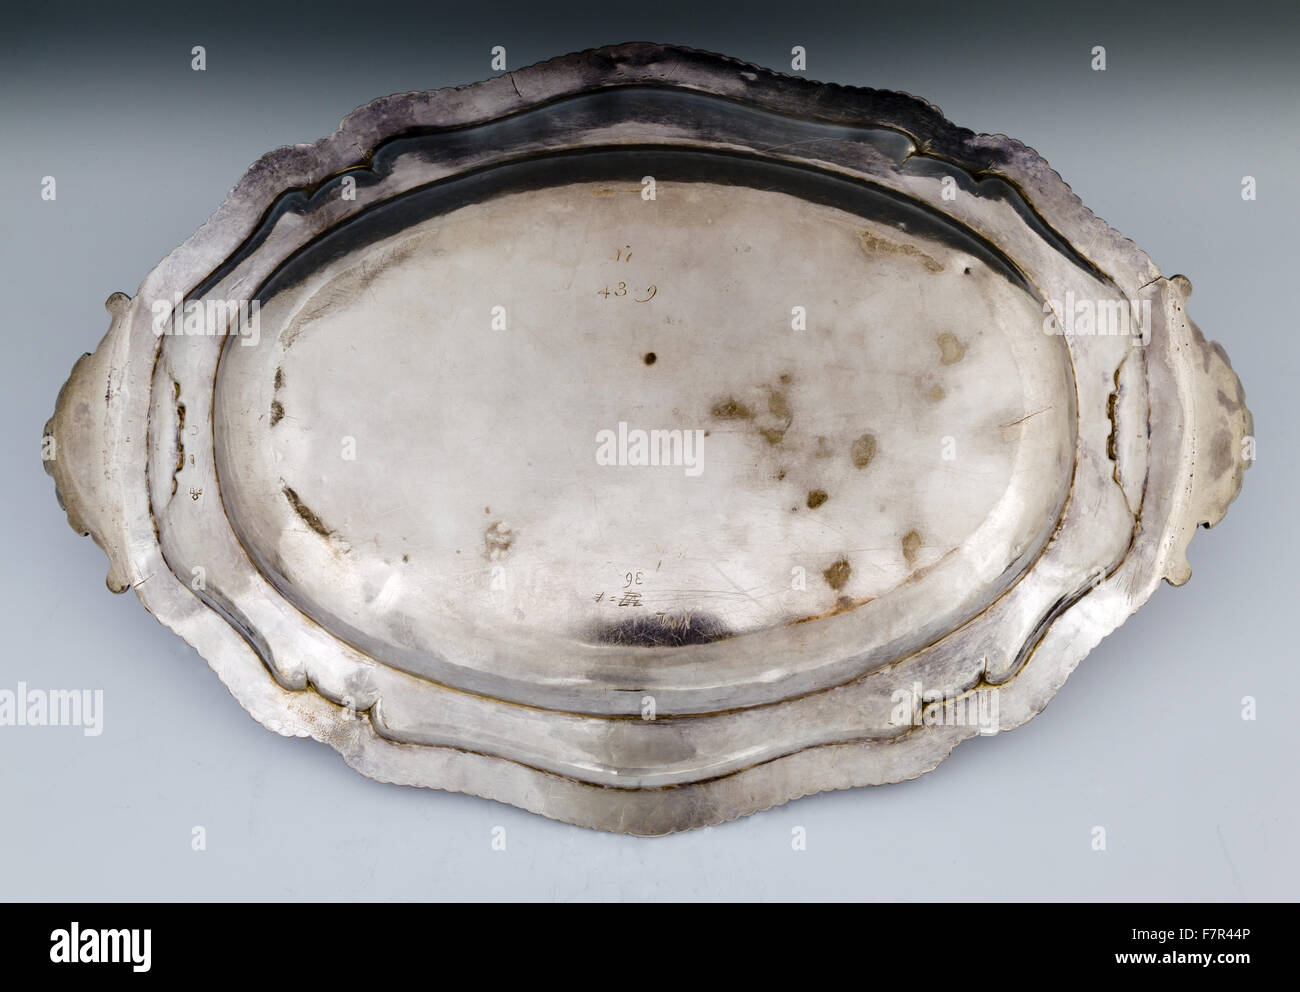 Oval meat dish, probably Frederick Kandler, c.1751, silver at Ickworth, Suffolk. Reverse. Length 14 ¾ inches. National Trust Inventory number 852095.8. Stock Photo